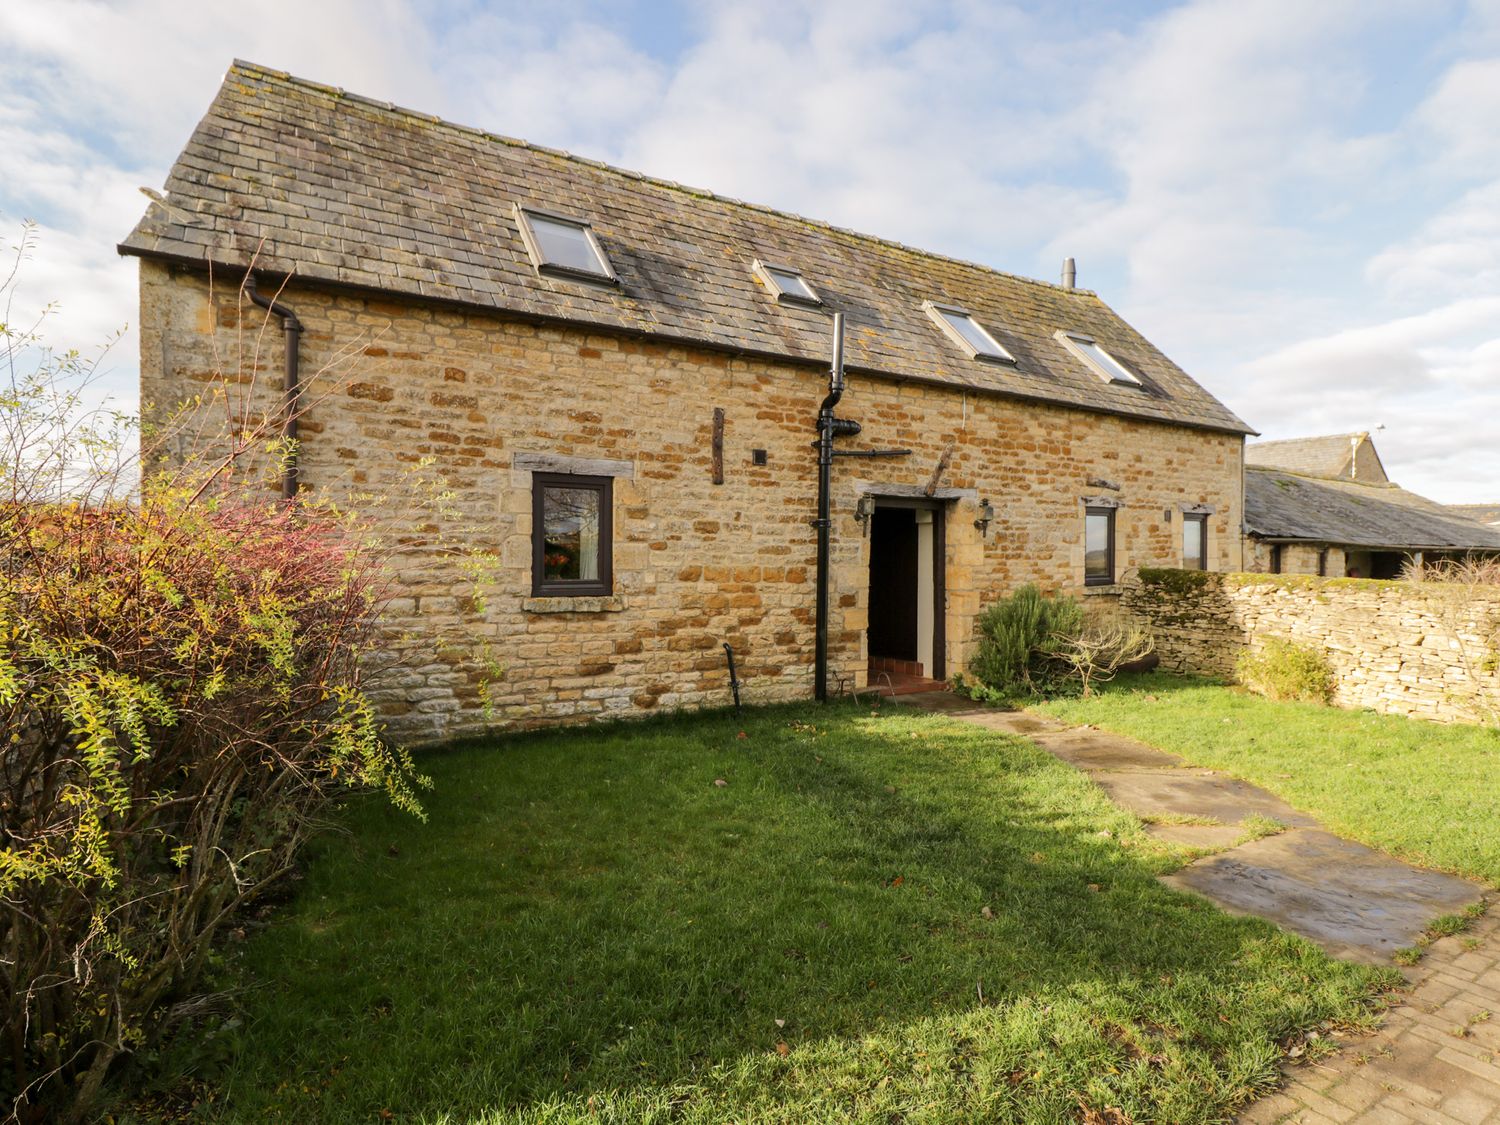 Well Cottage - Cotswolds - 1144705 - photo 1